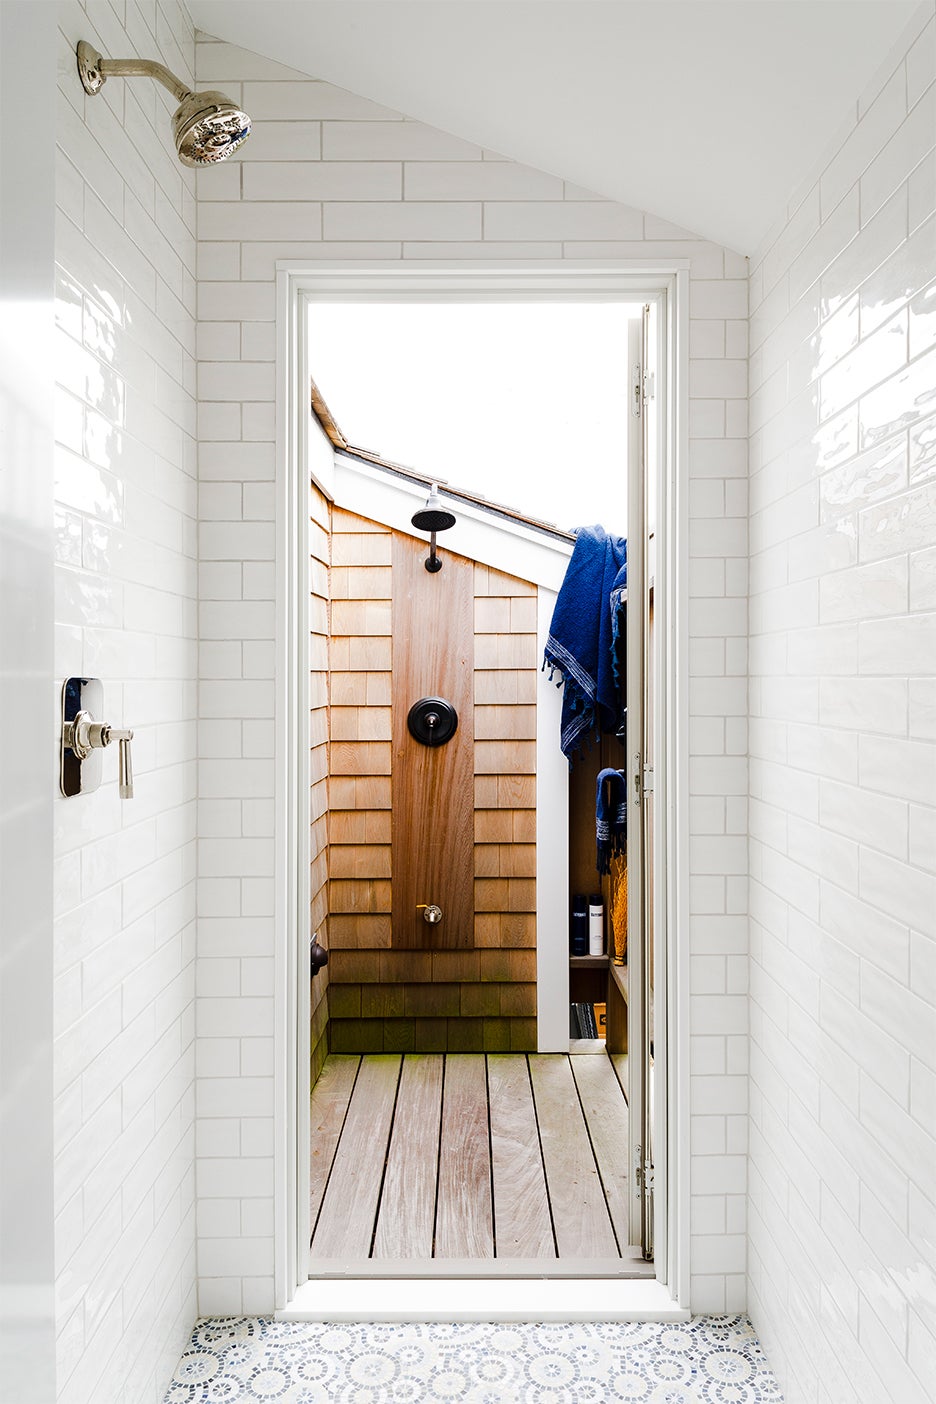 indoor tiled shower leading to wood outdoor shower on balcony